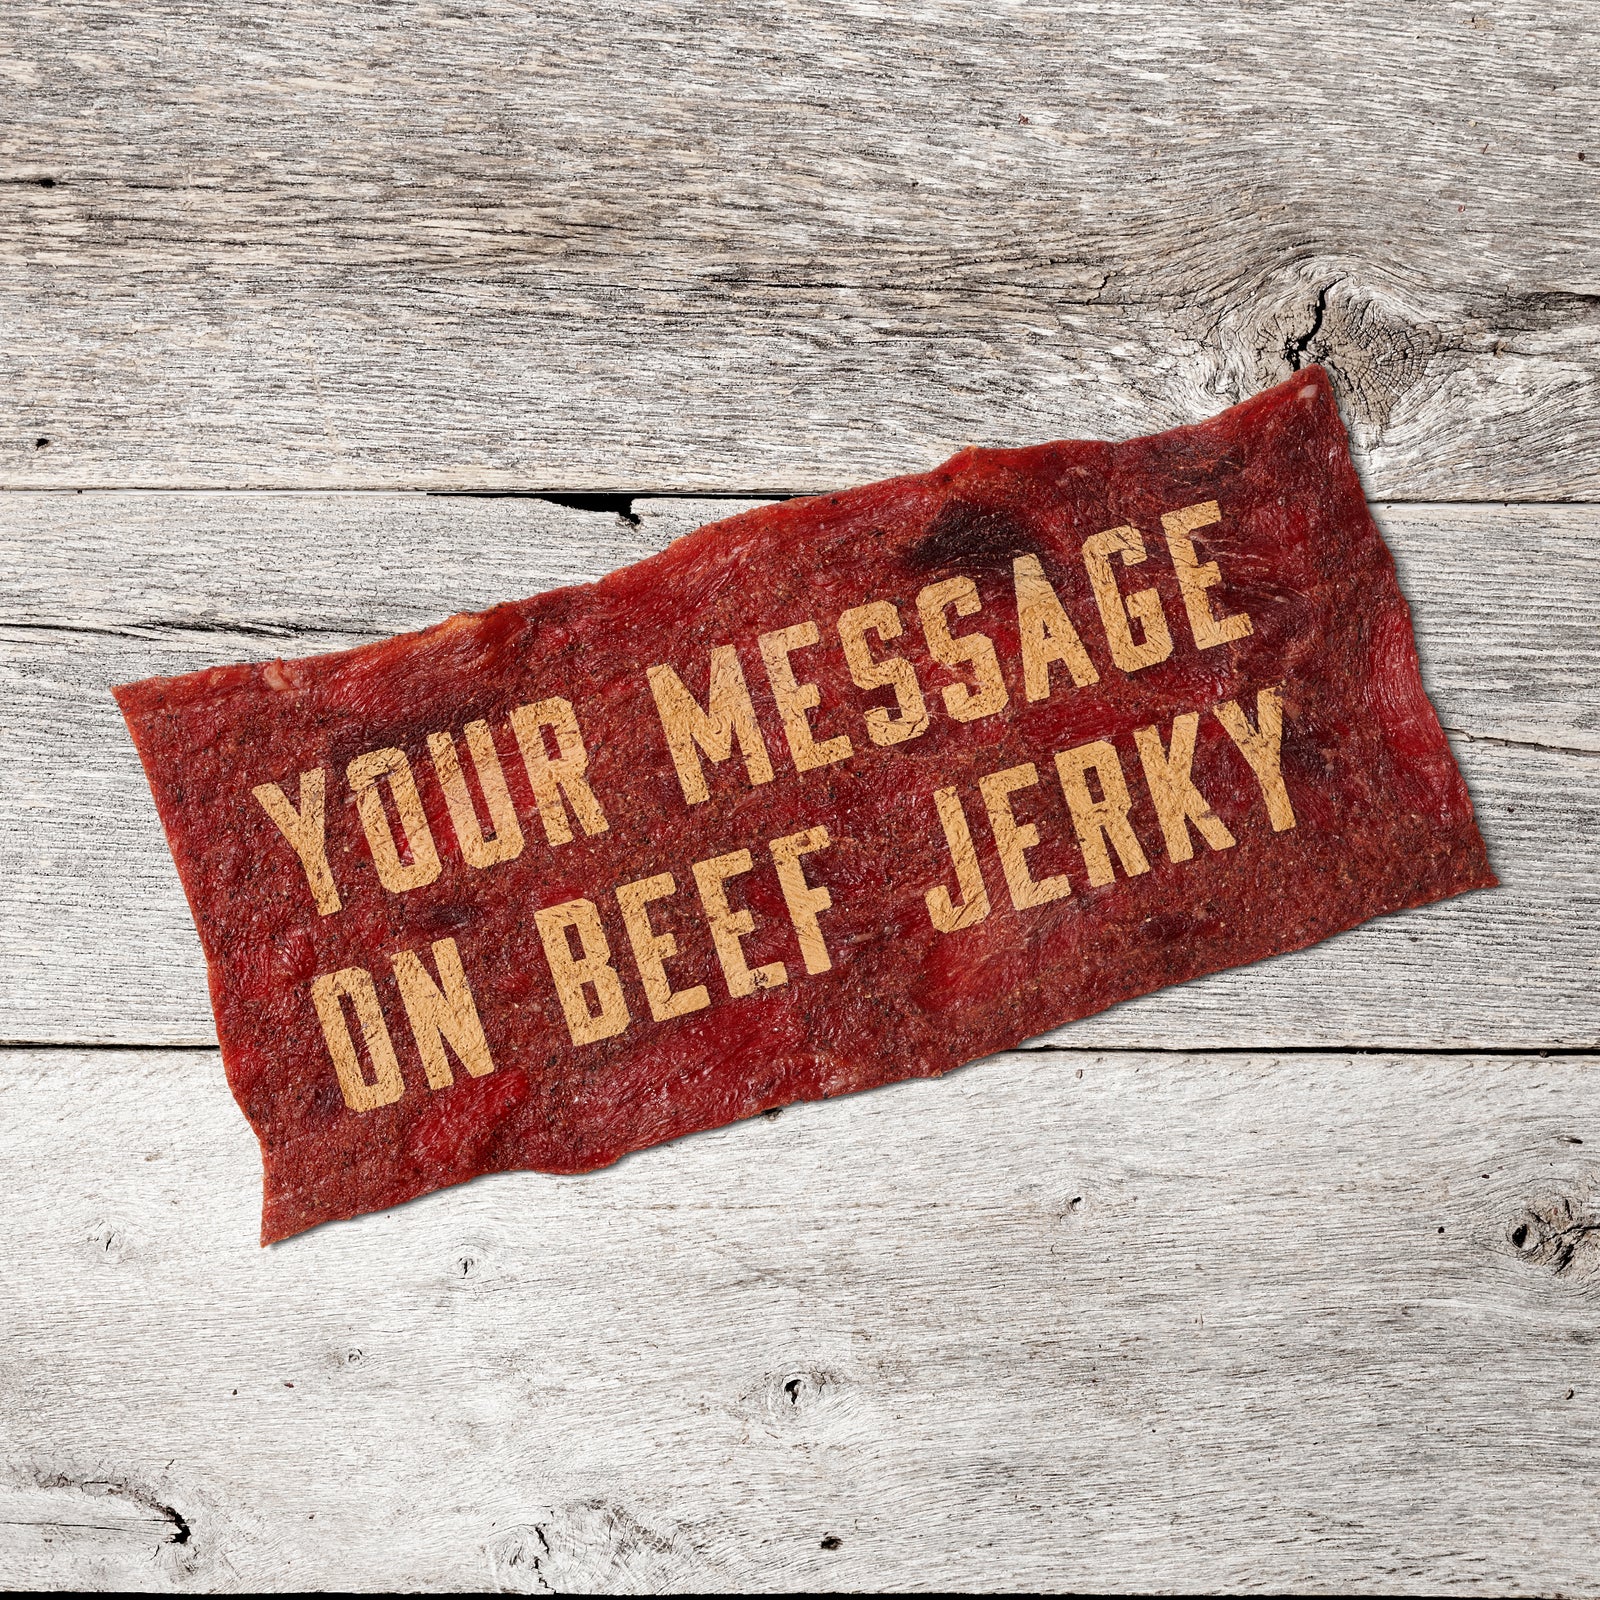 Meat Card on a wood surface that says: Your Message on Beef Jerky